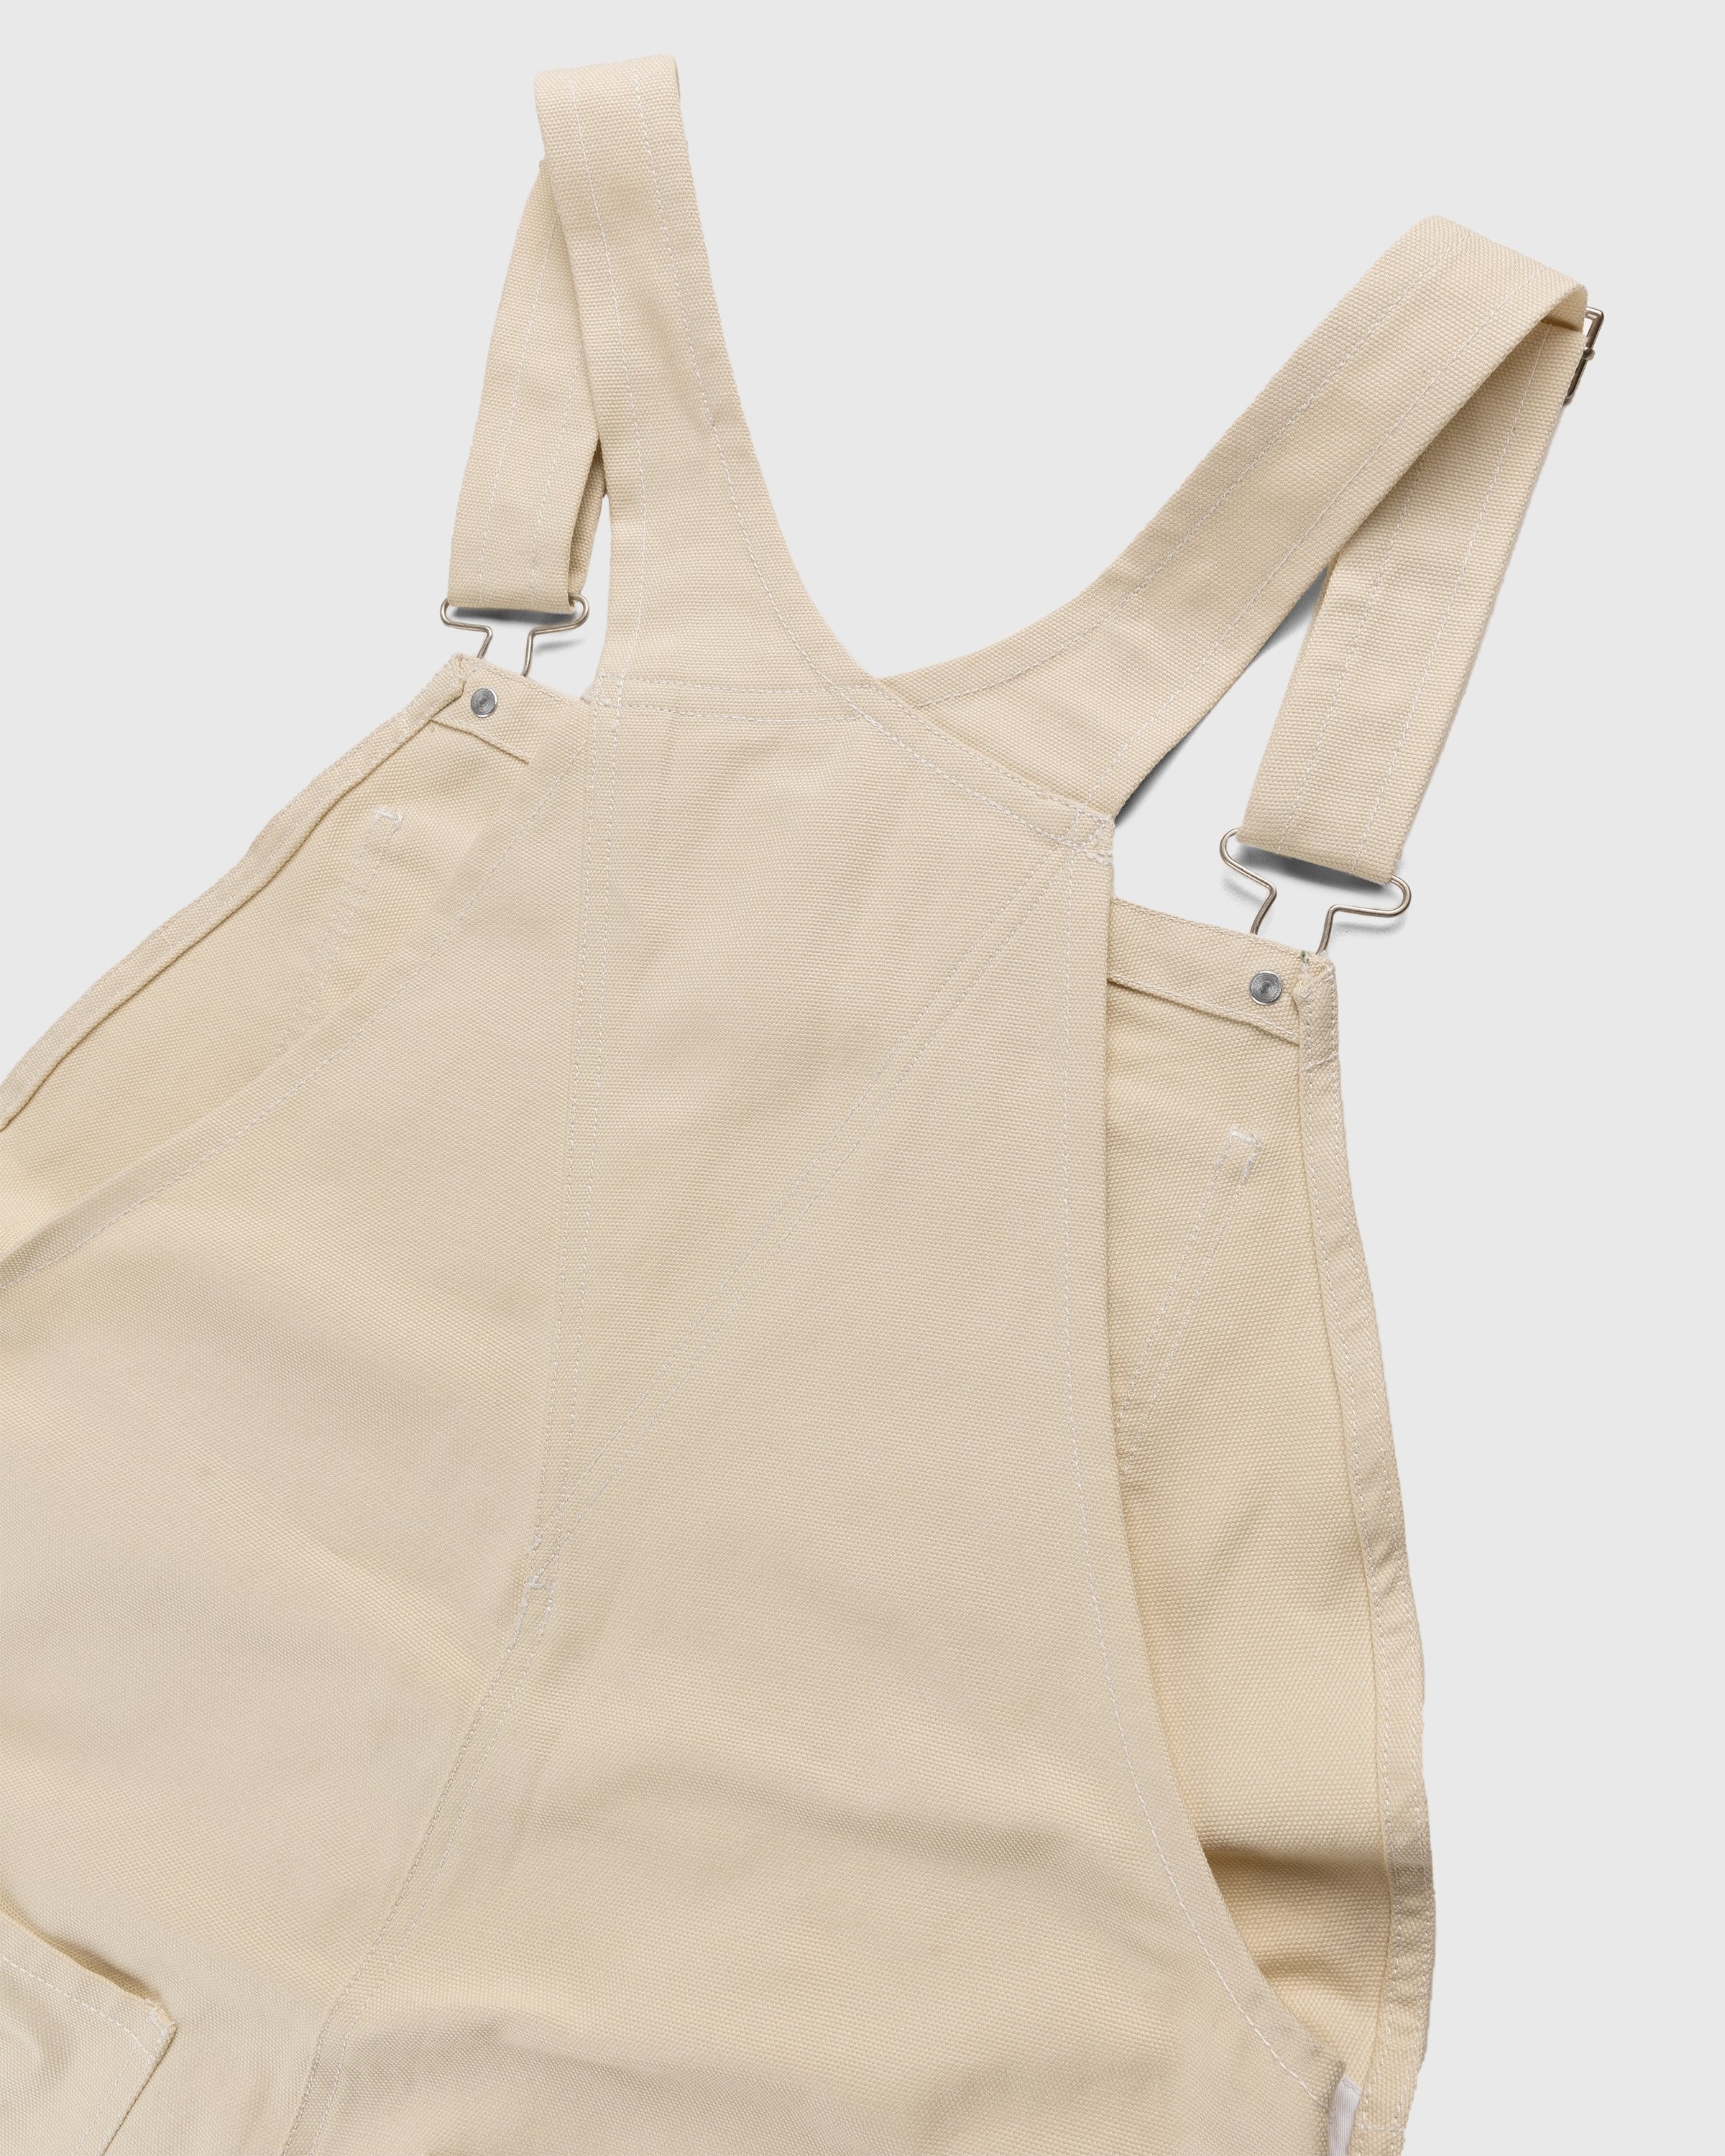 RUF x Highsnobiety – Cotton Overalls Natural - Trousers - Beige - Image 3